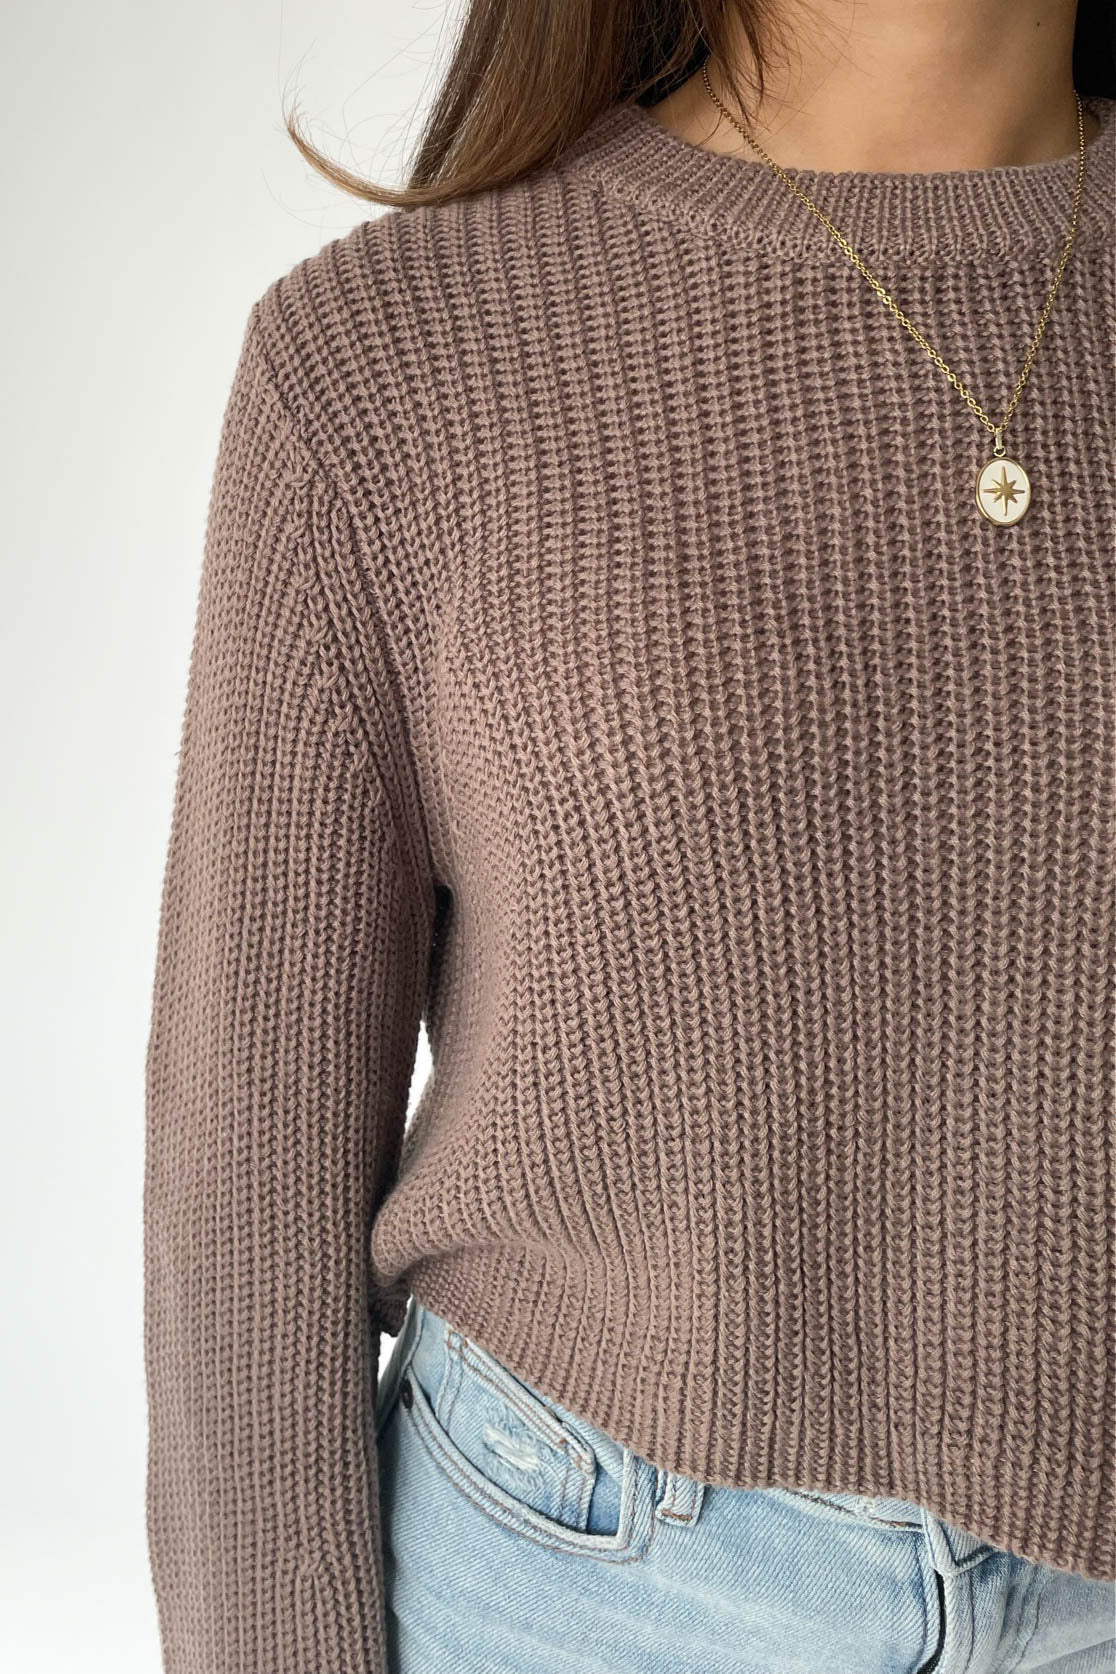 Act Natural Sweater in Mocha